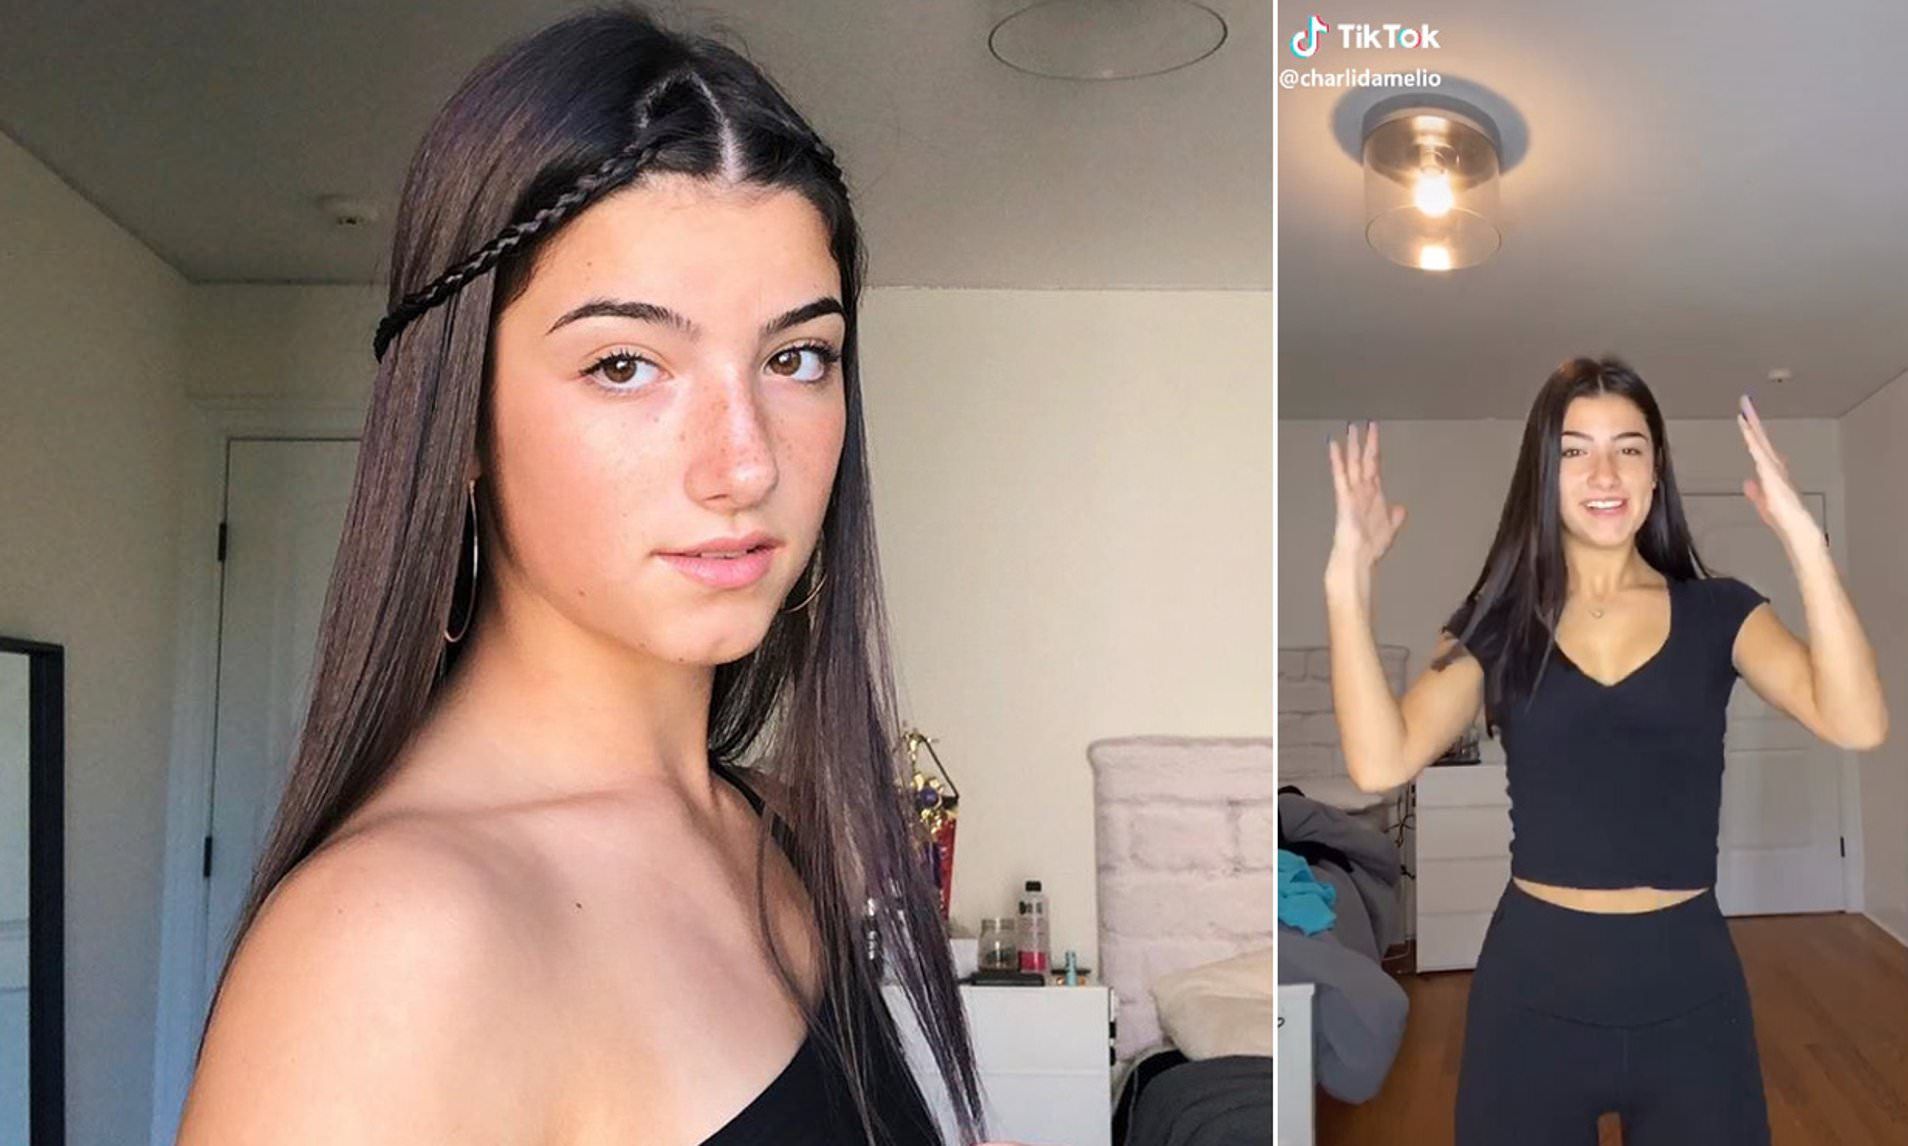 Teenagers Can't Stop Talking About TikTok's 15 Year Old